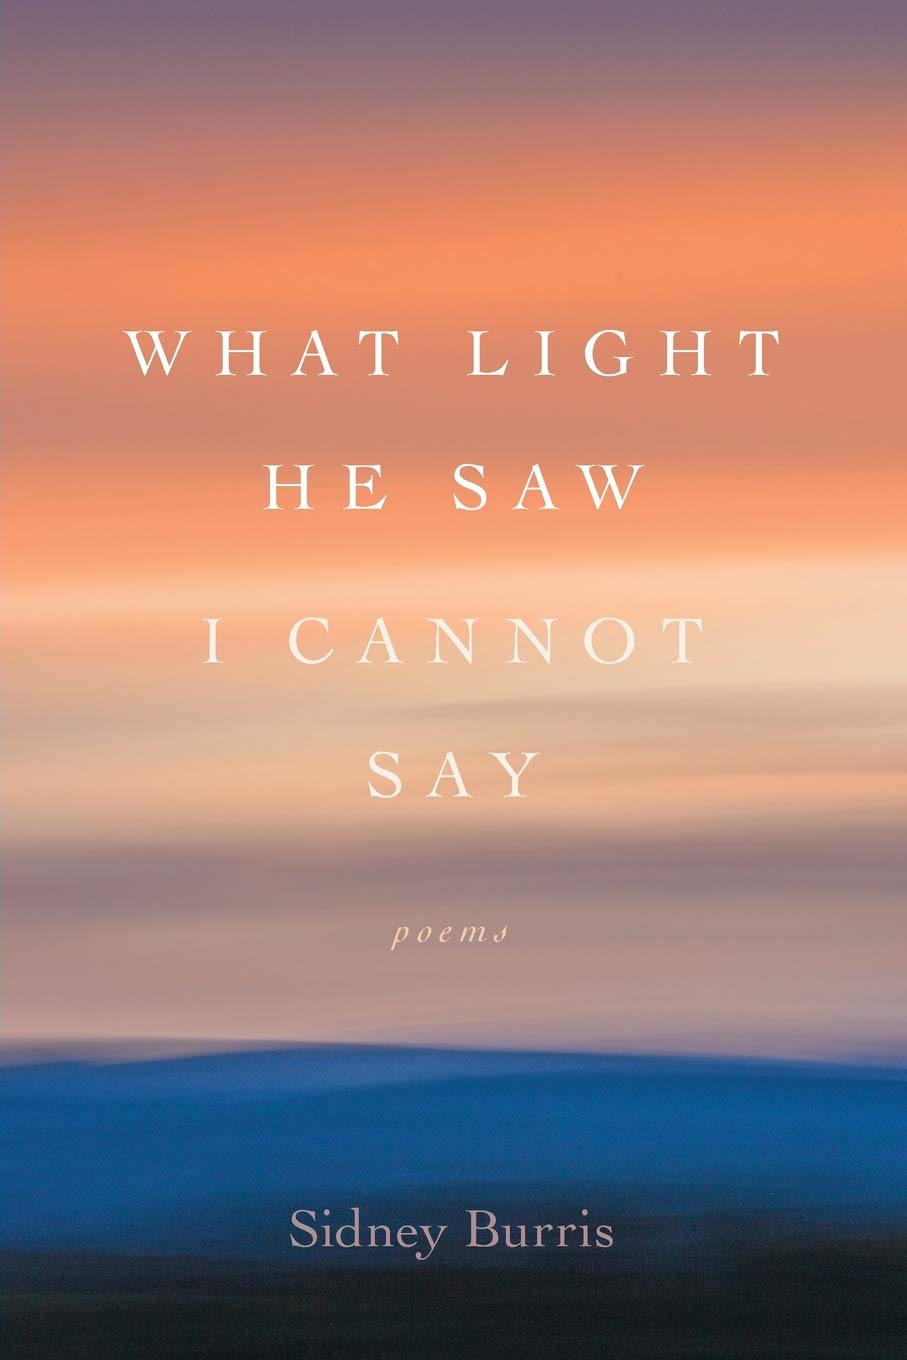 What Light He Saw I Cannot Say: Poems (April 2021)